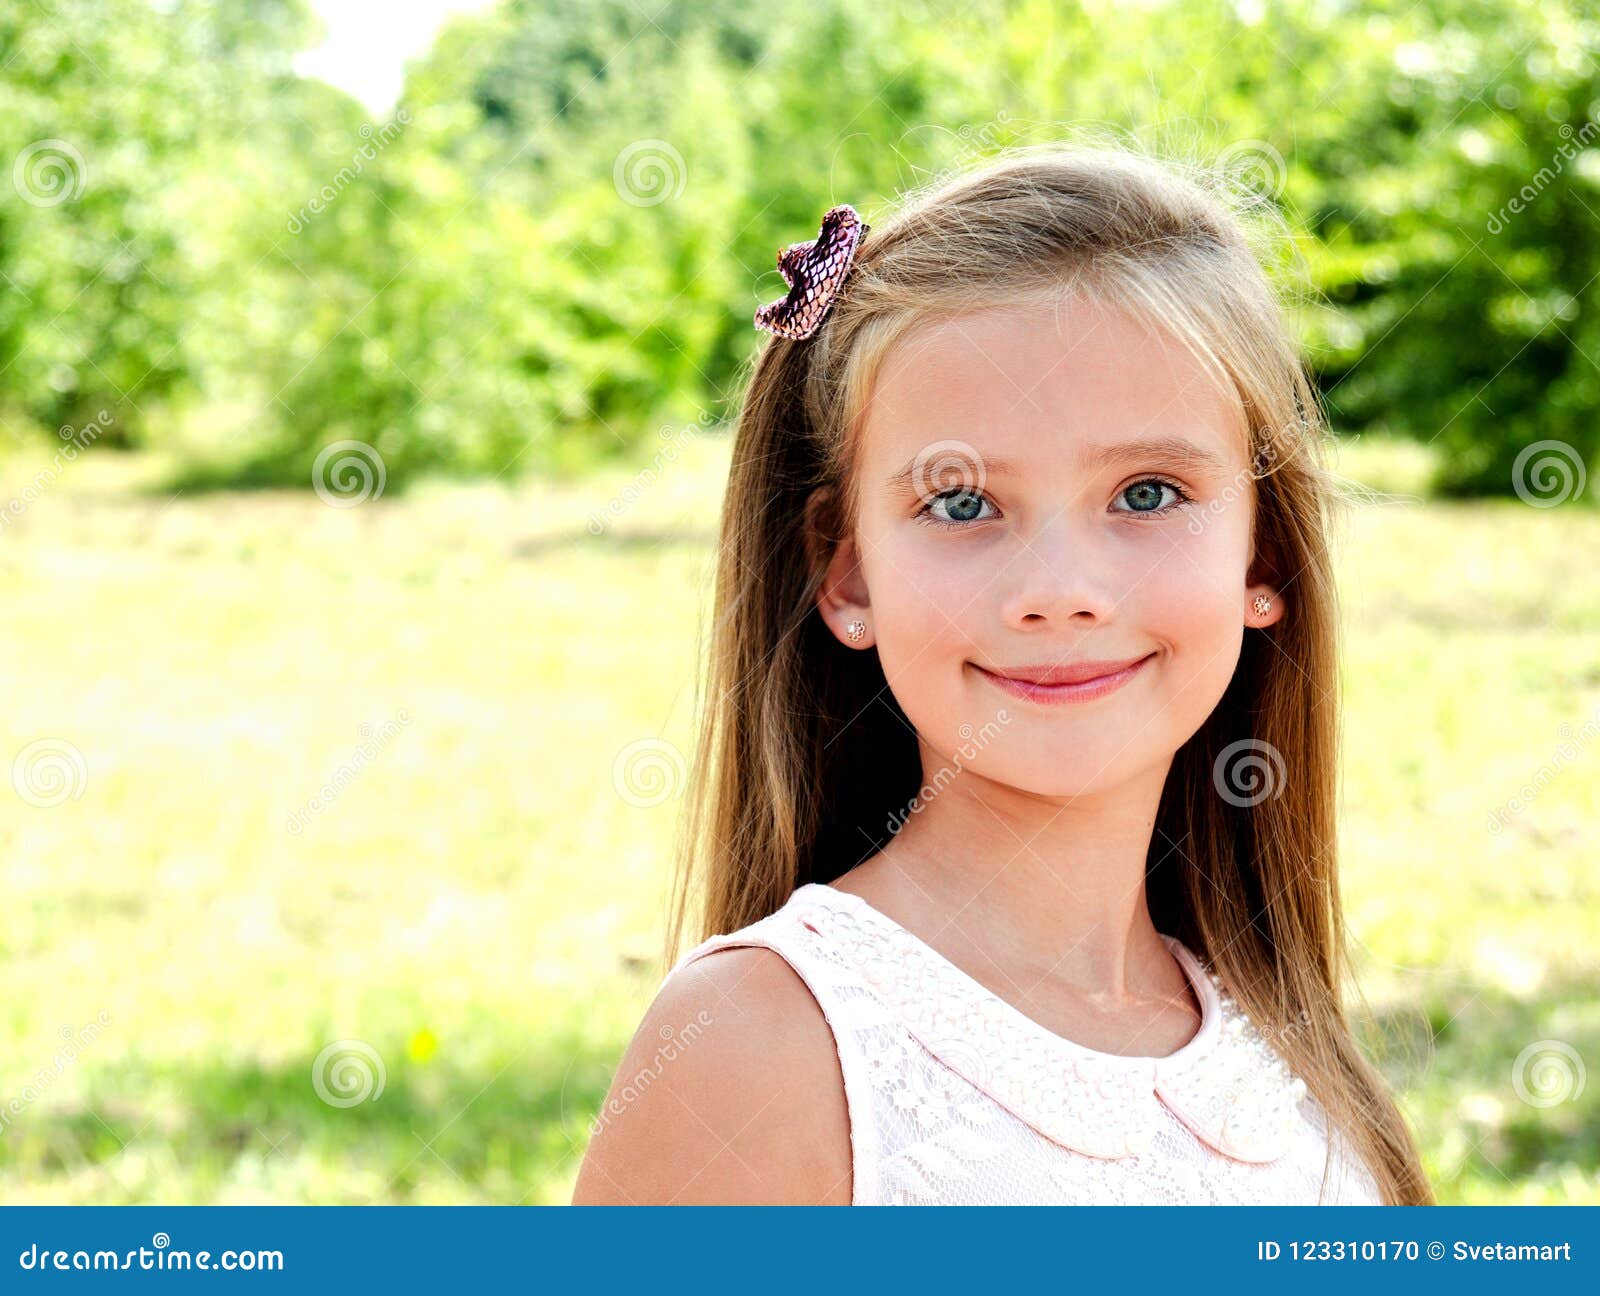 Portrait of Adorable Smiling Little Girl Outdoors Stock Photo - Image ...